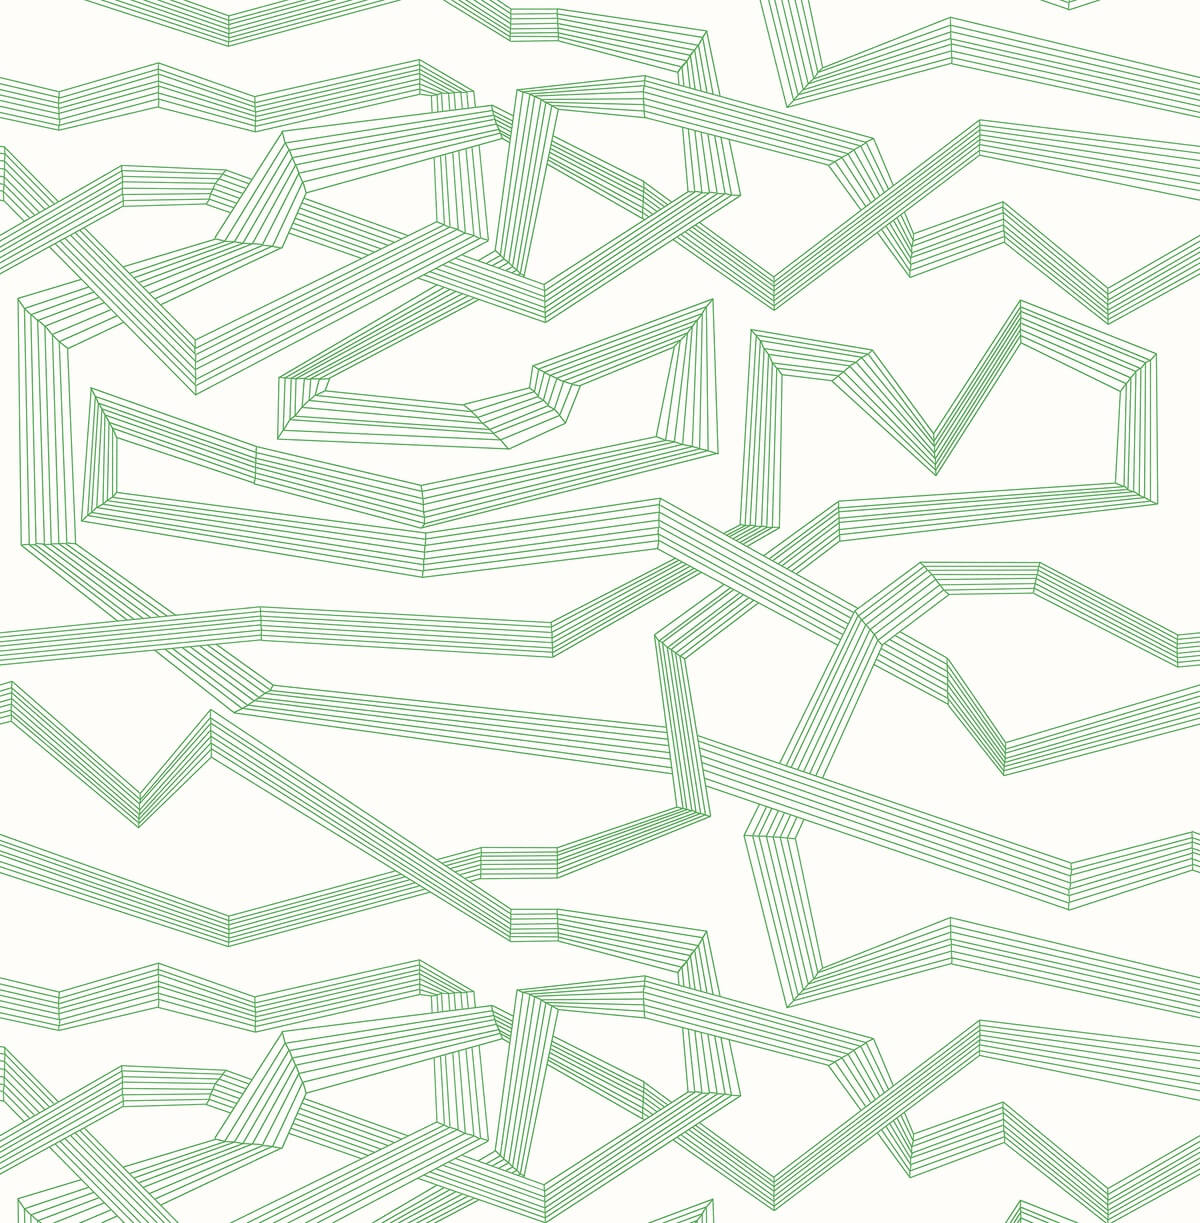 Boomerang pattern in green with white background